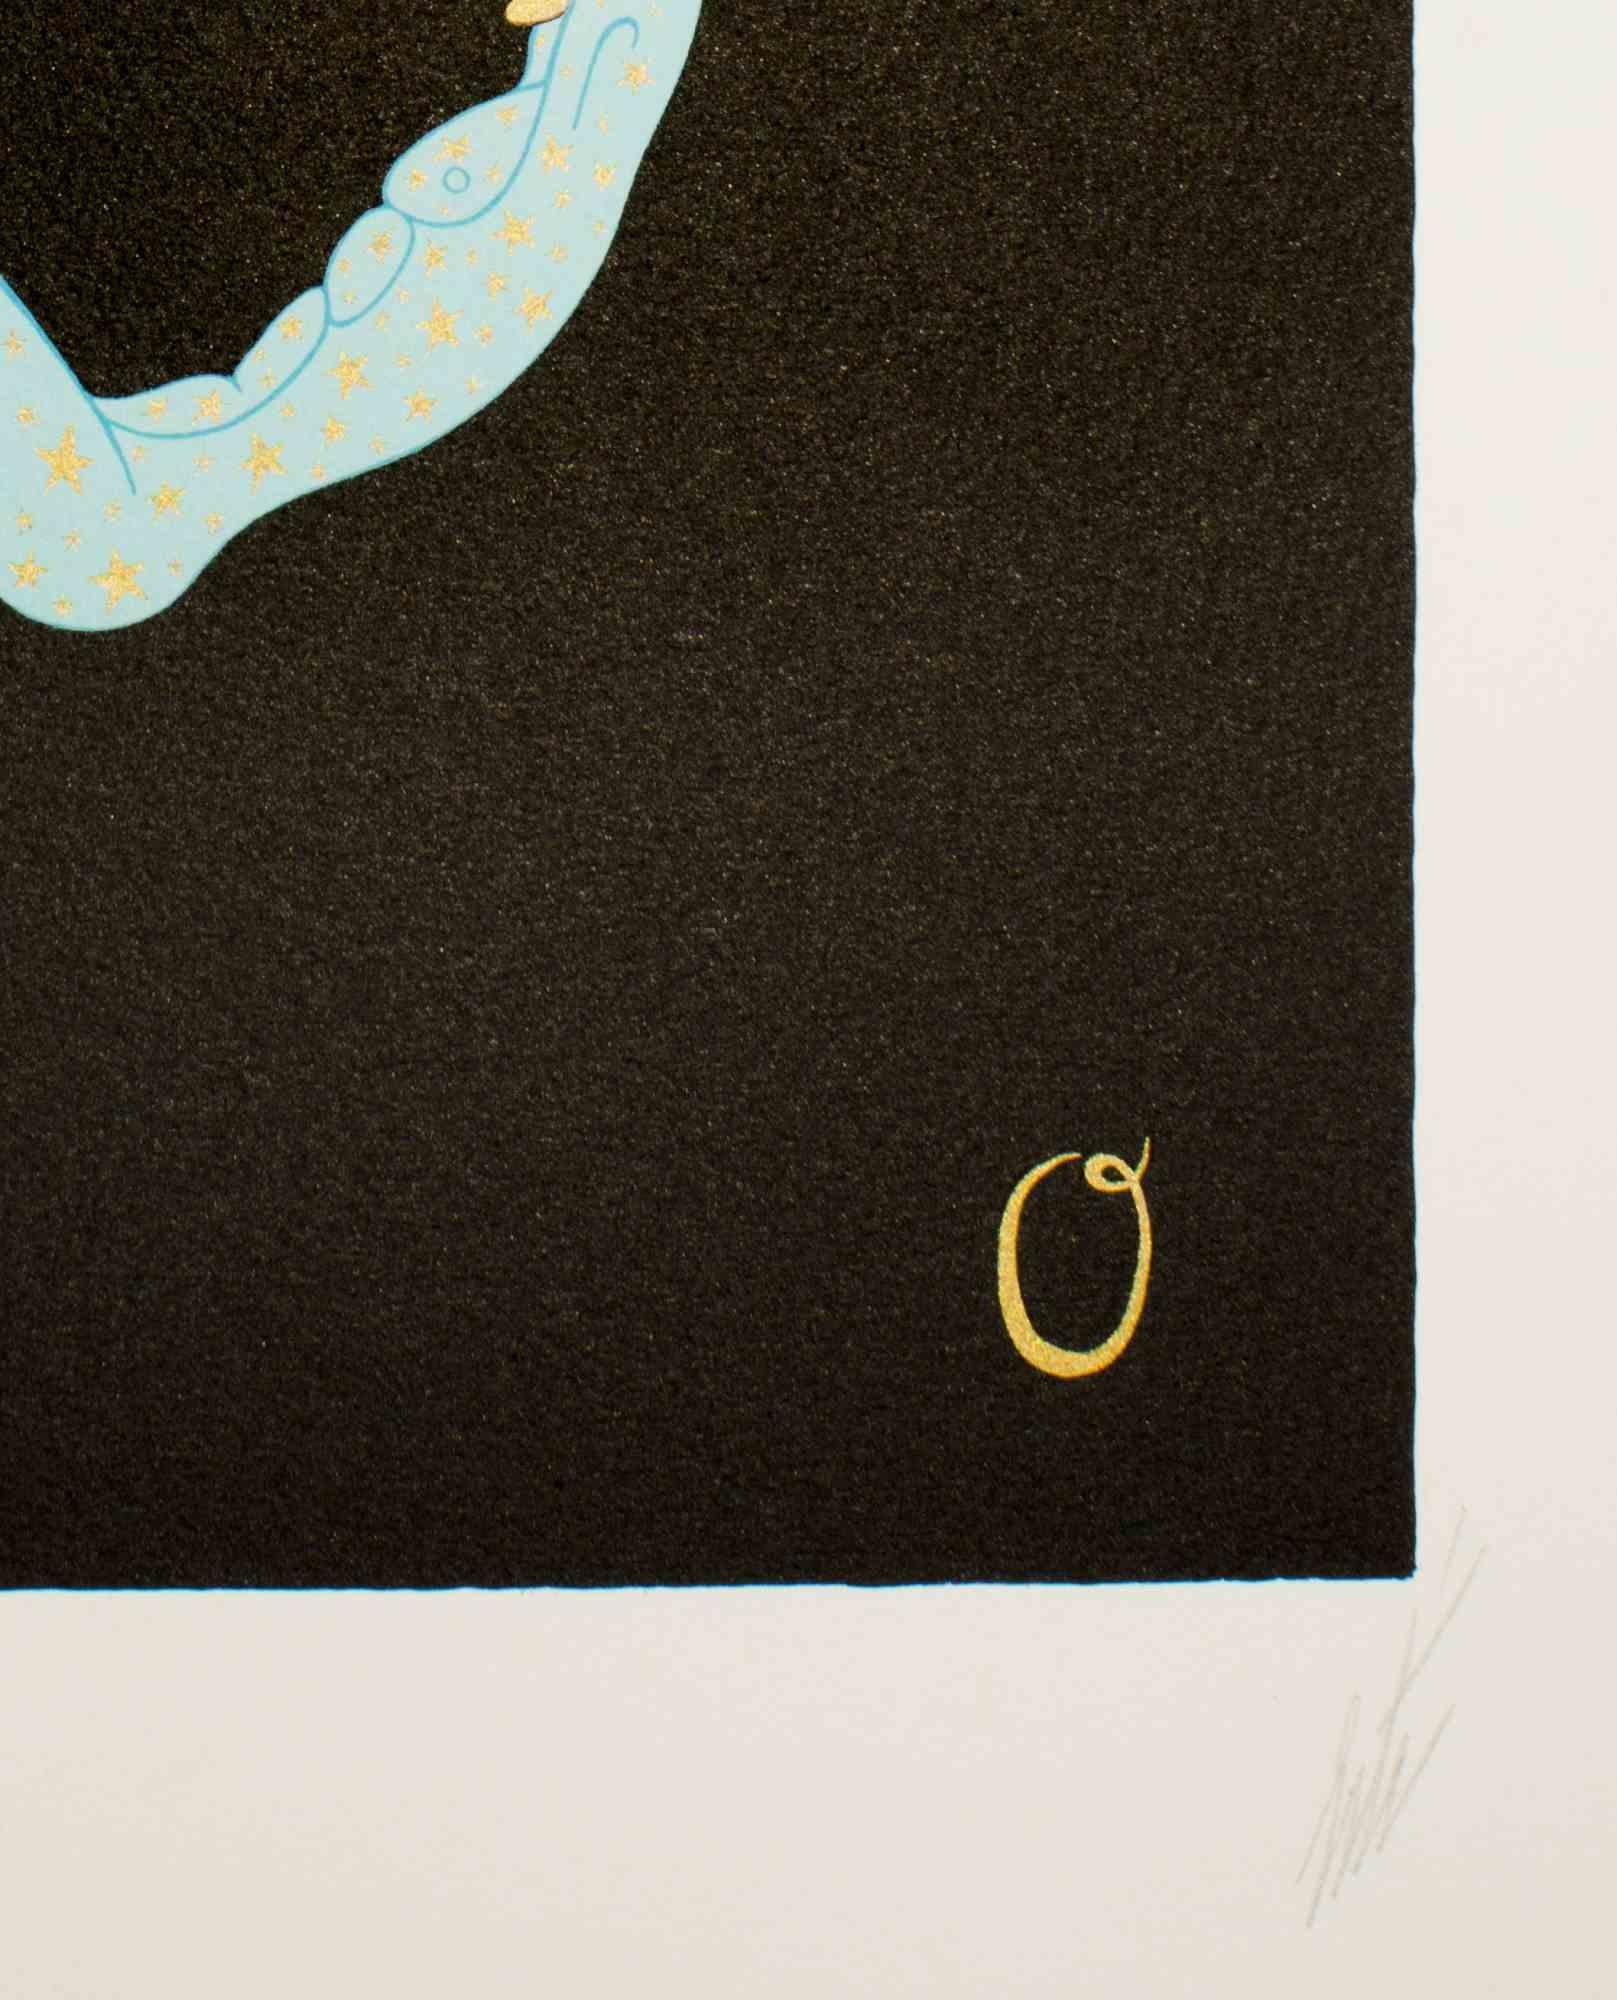 Letter O - Lithograph and Screen Print by Erté - 1976 For Sale 2